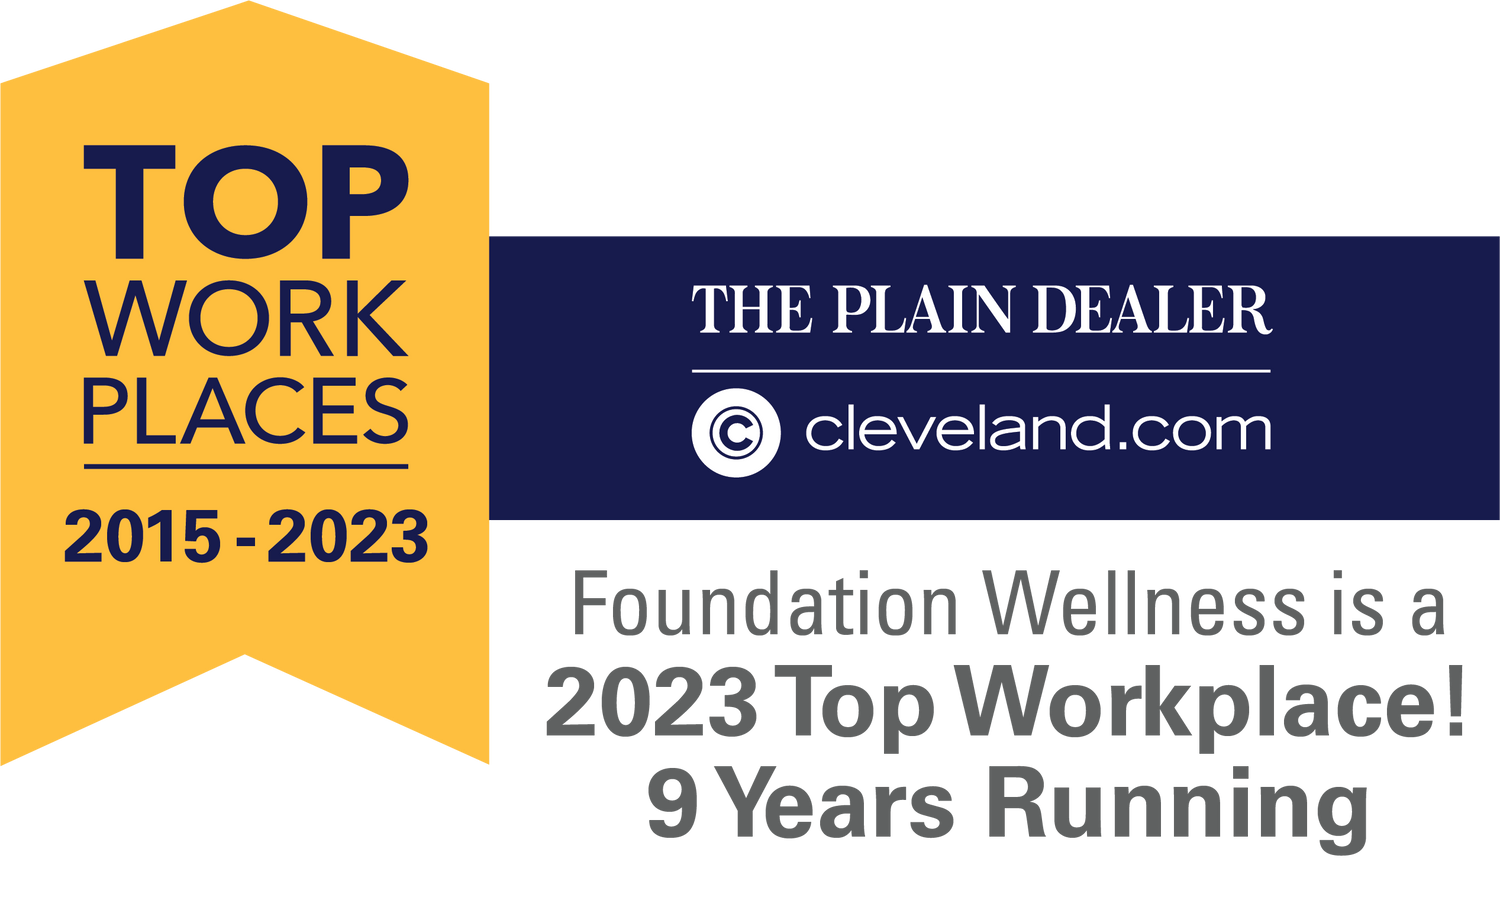 Foundation Wellness is a 2023 Top Workplace by The Cleveland Plain Dealer